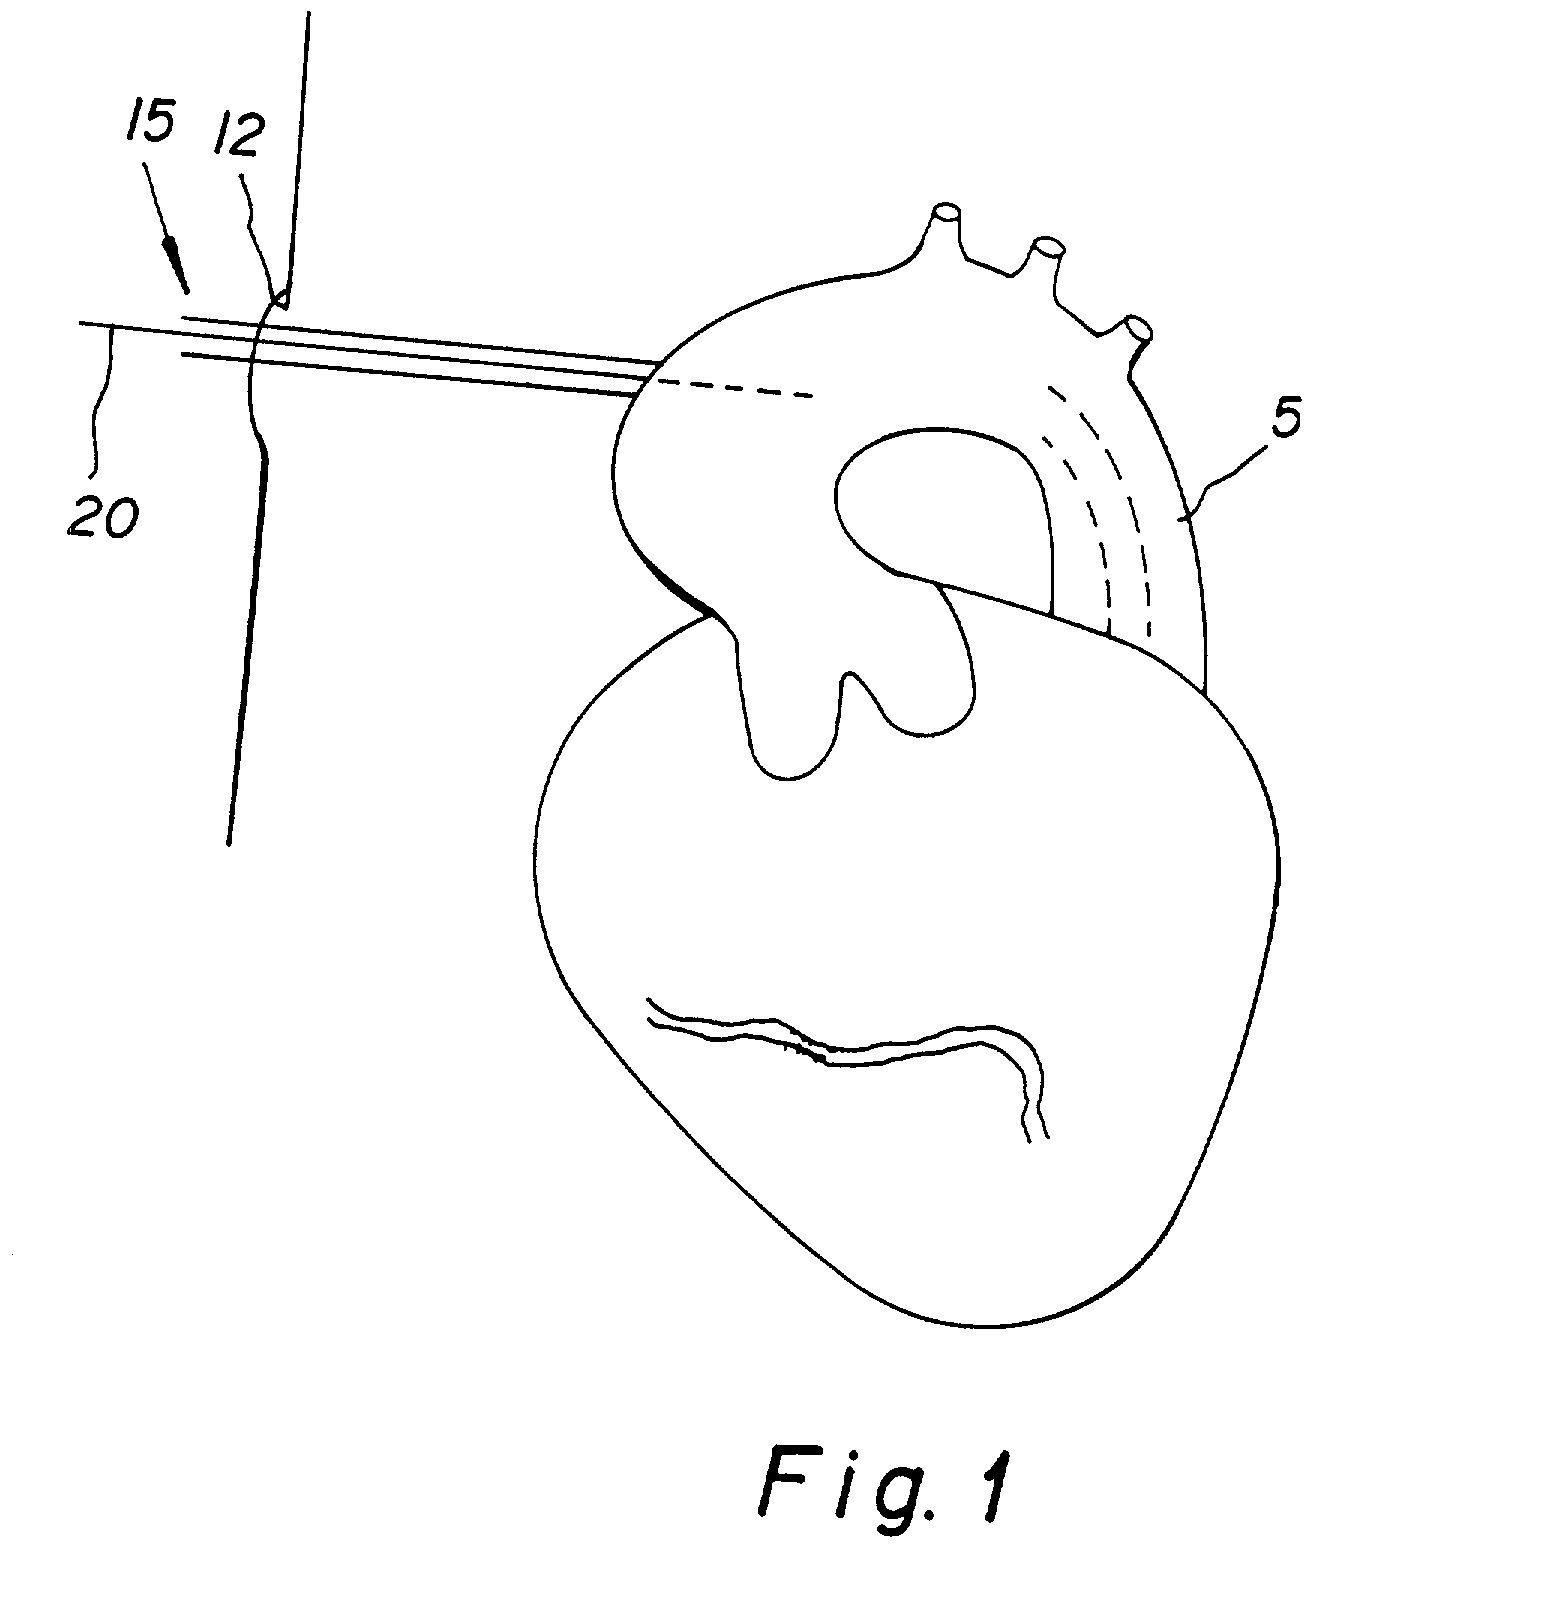 Method and apparatus for performing an anastamosis